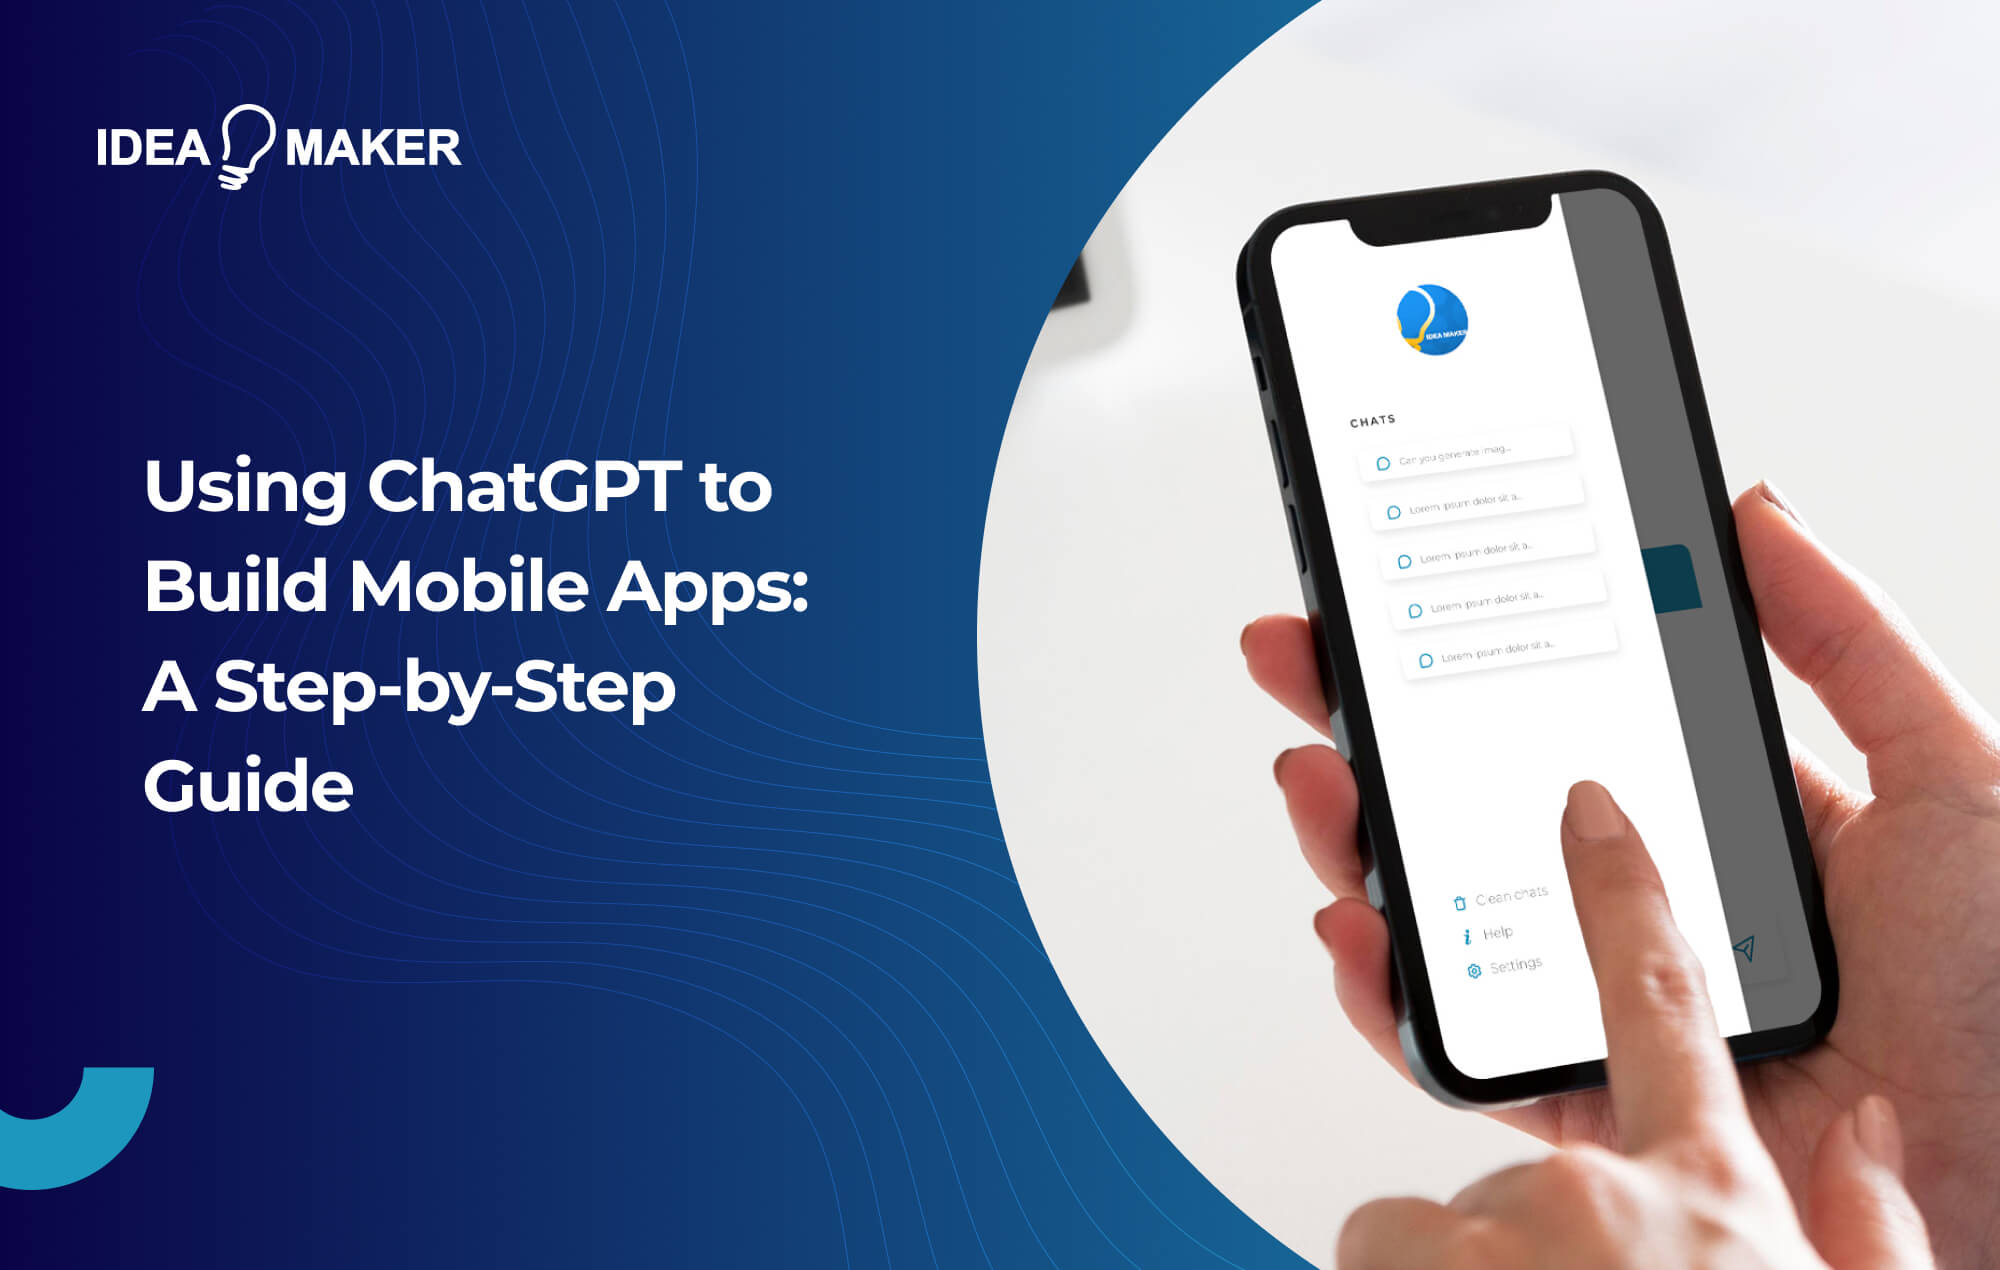 Ideamaker - Using ChatGPT to Build Mobile Apps_ A Step-by-Step Guide